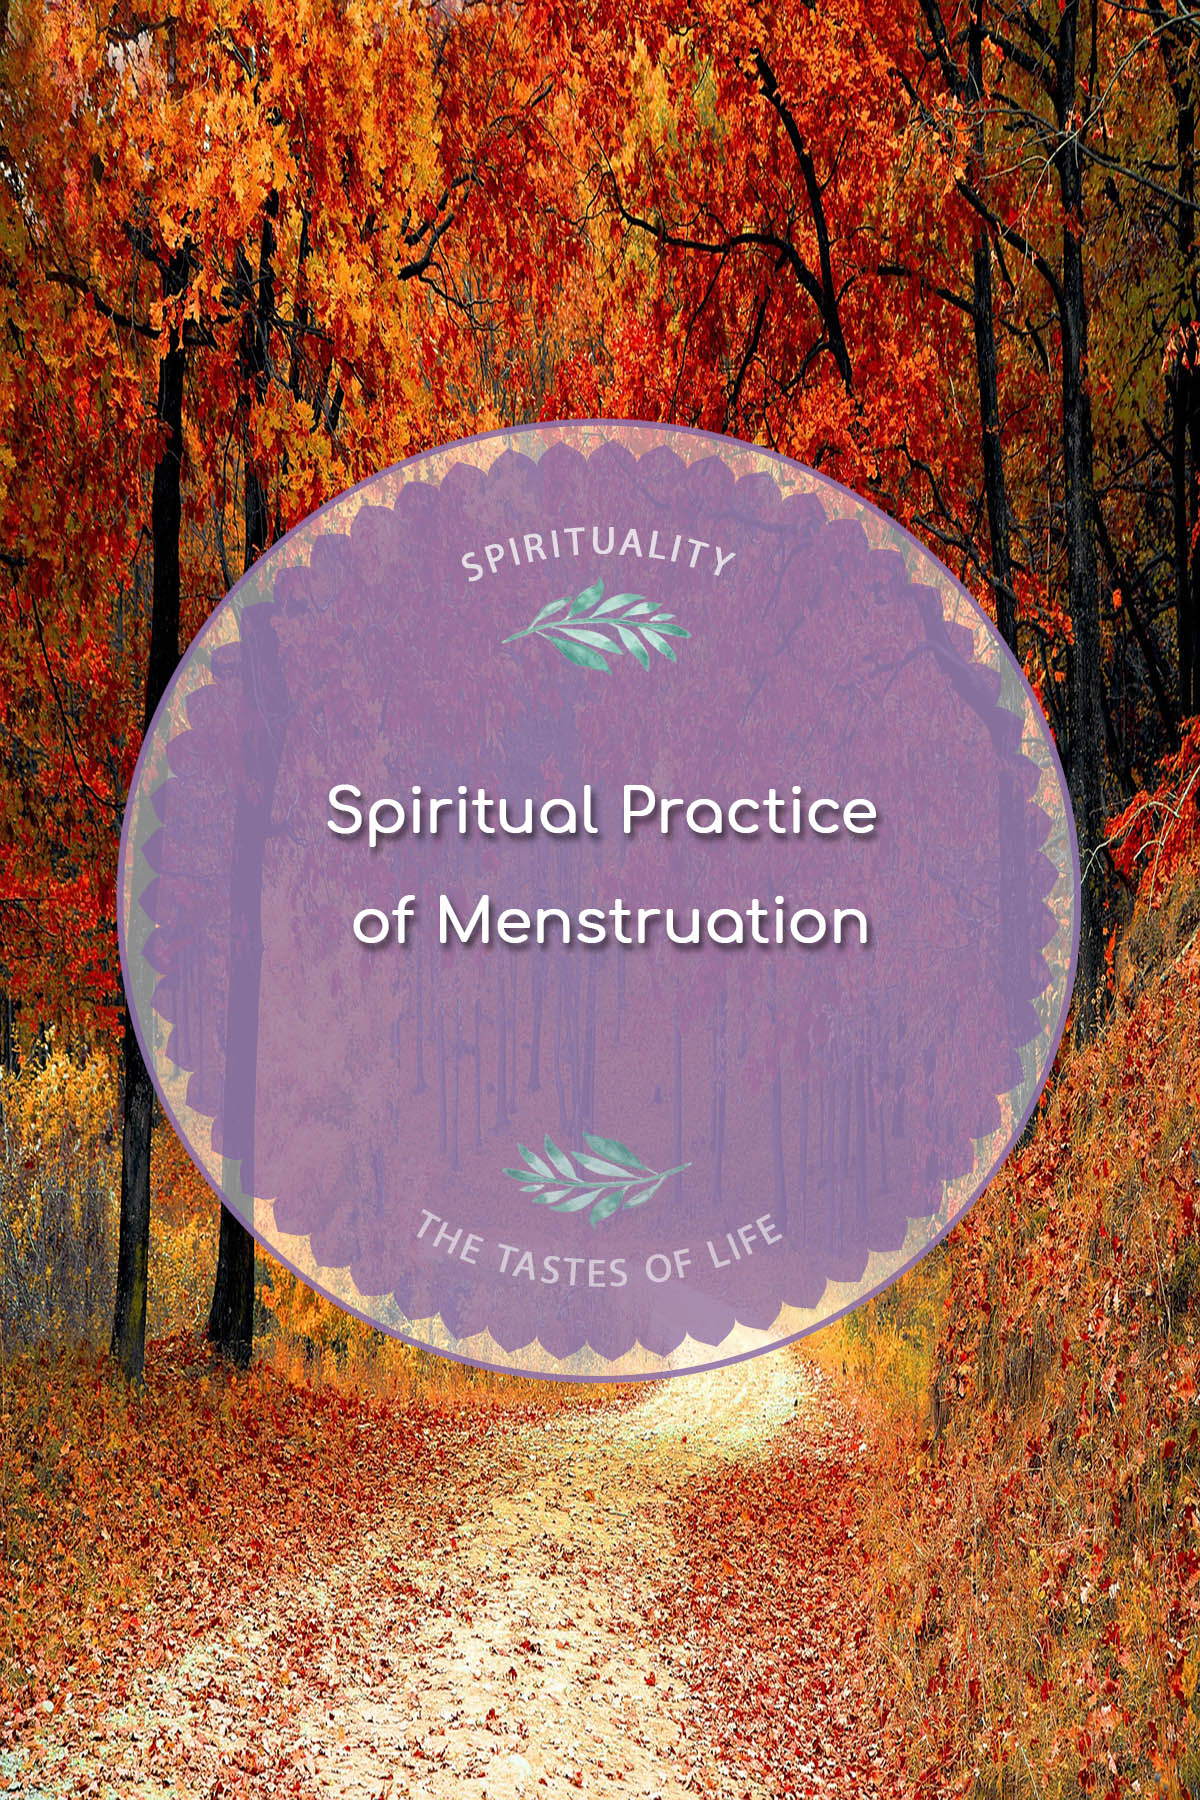 Menstruation – Can You Approach It Like A Spiritual Practice?